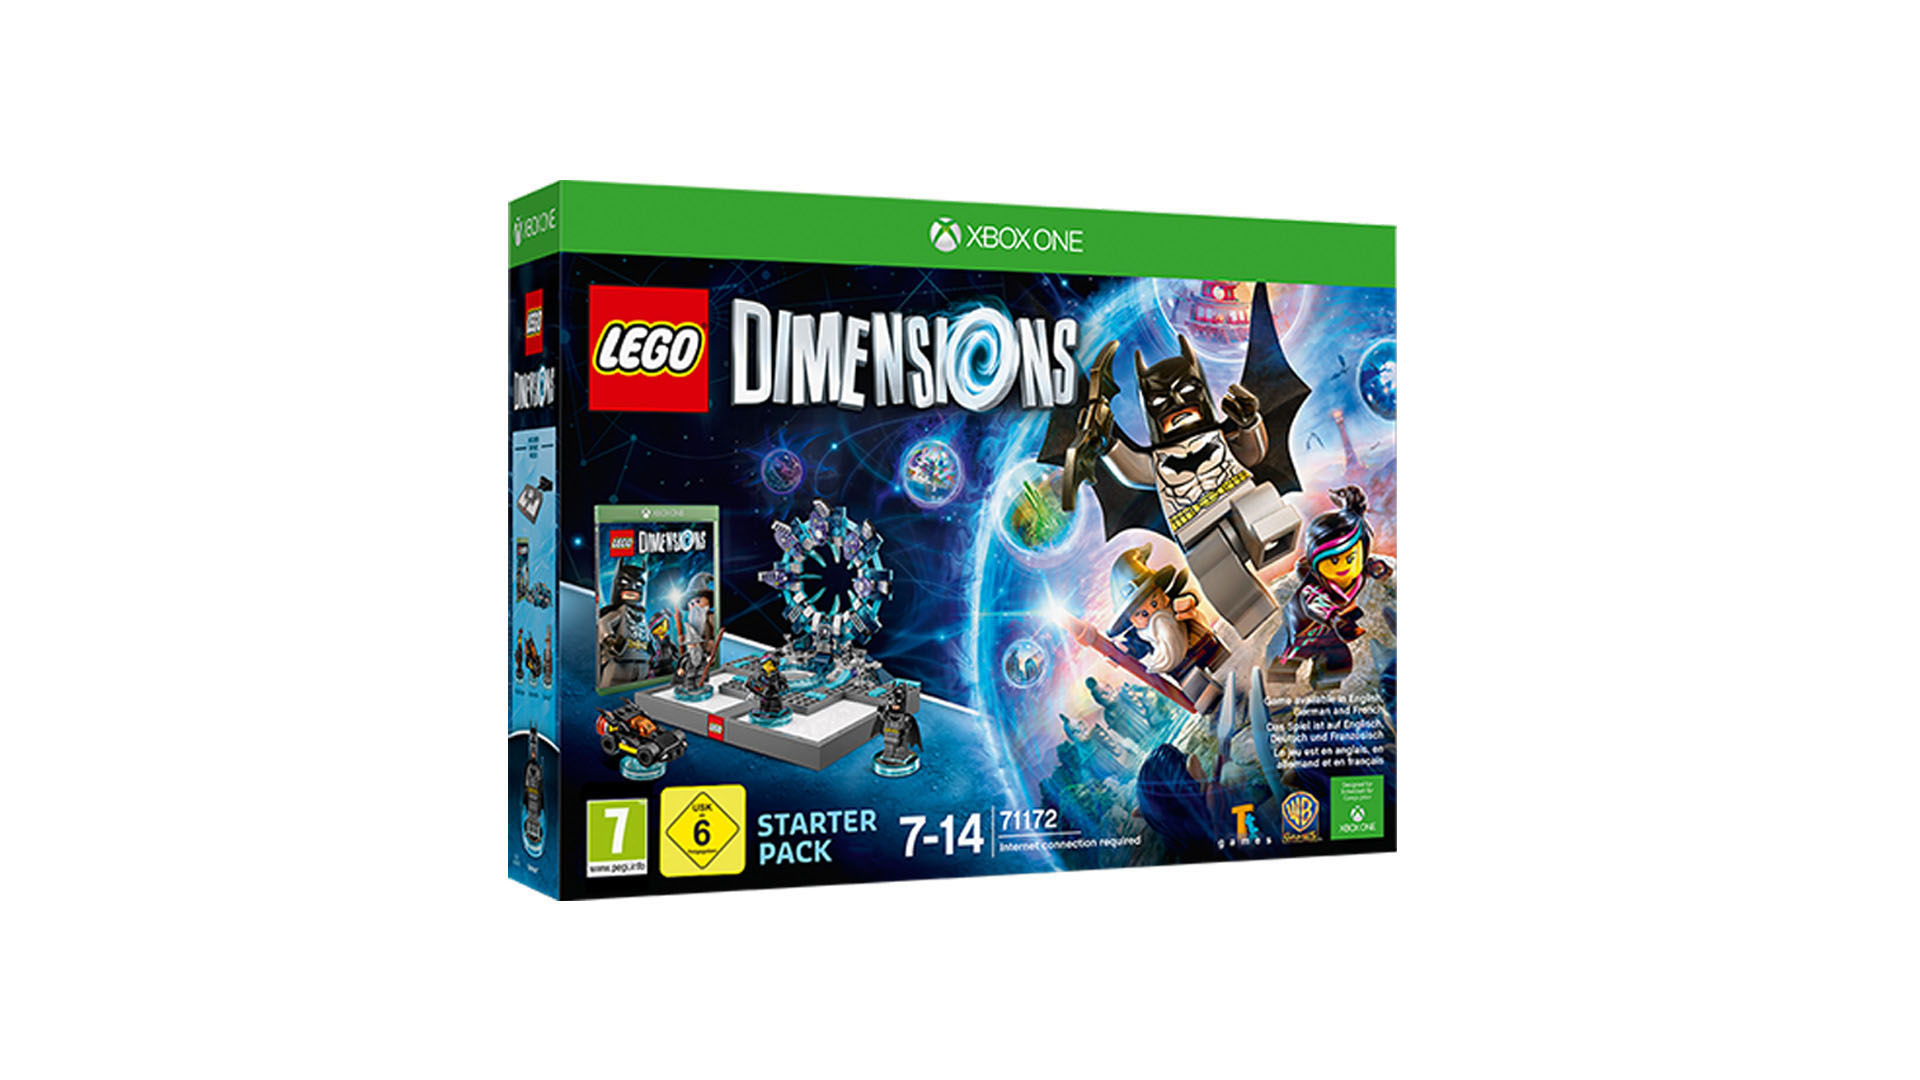 LEGO DIMENSIONS LEGO Dimensions Starter XBOXONE Toy Pack Smart